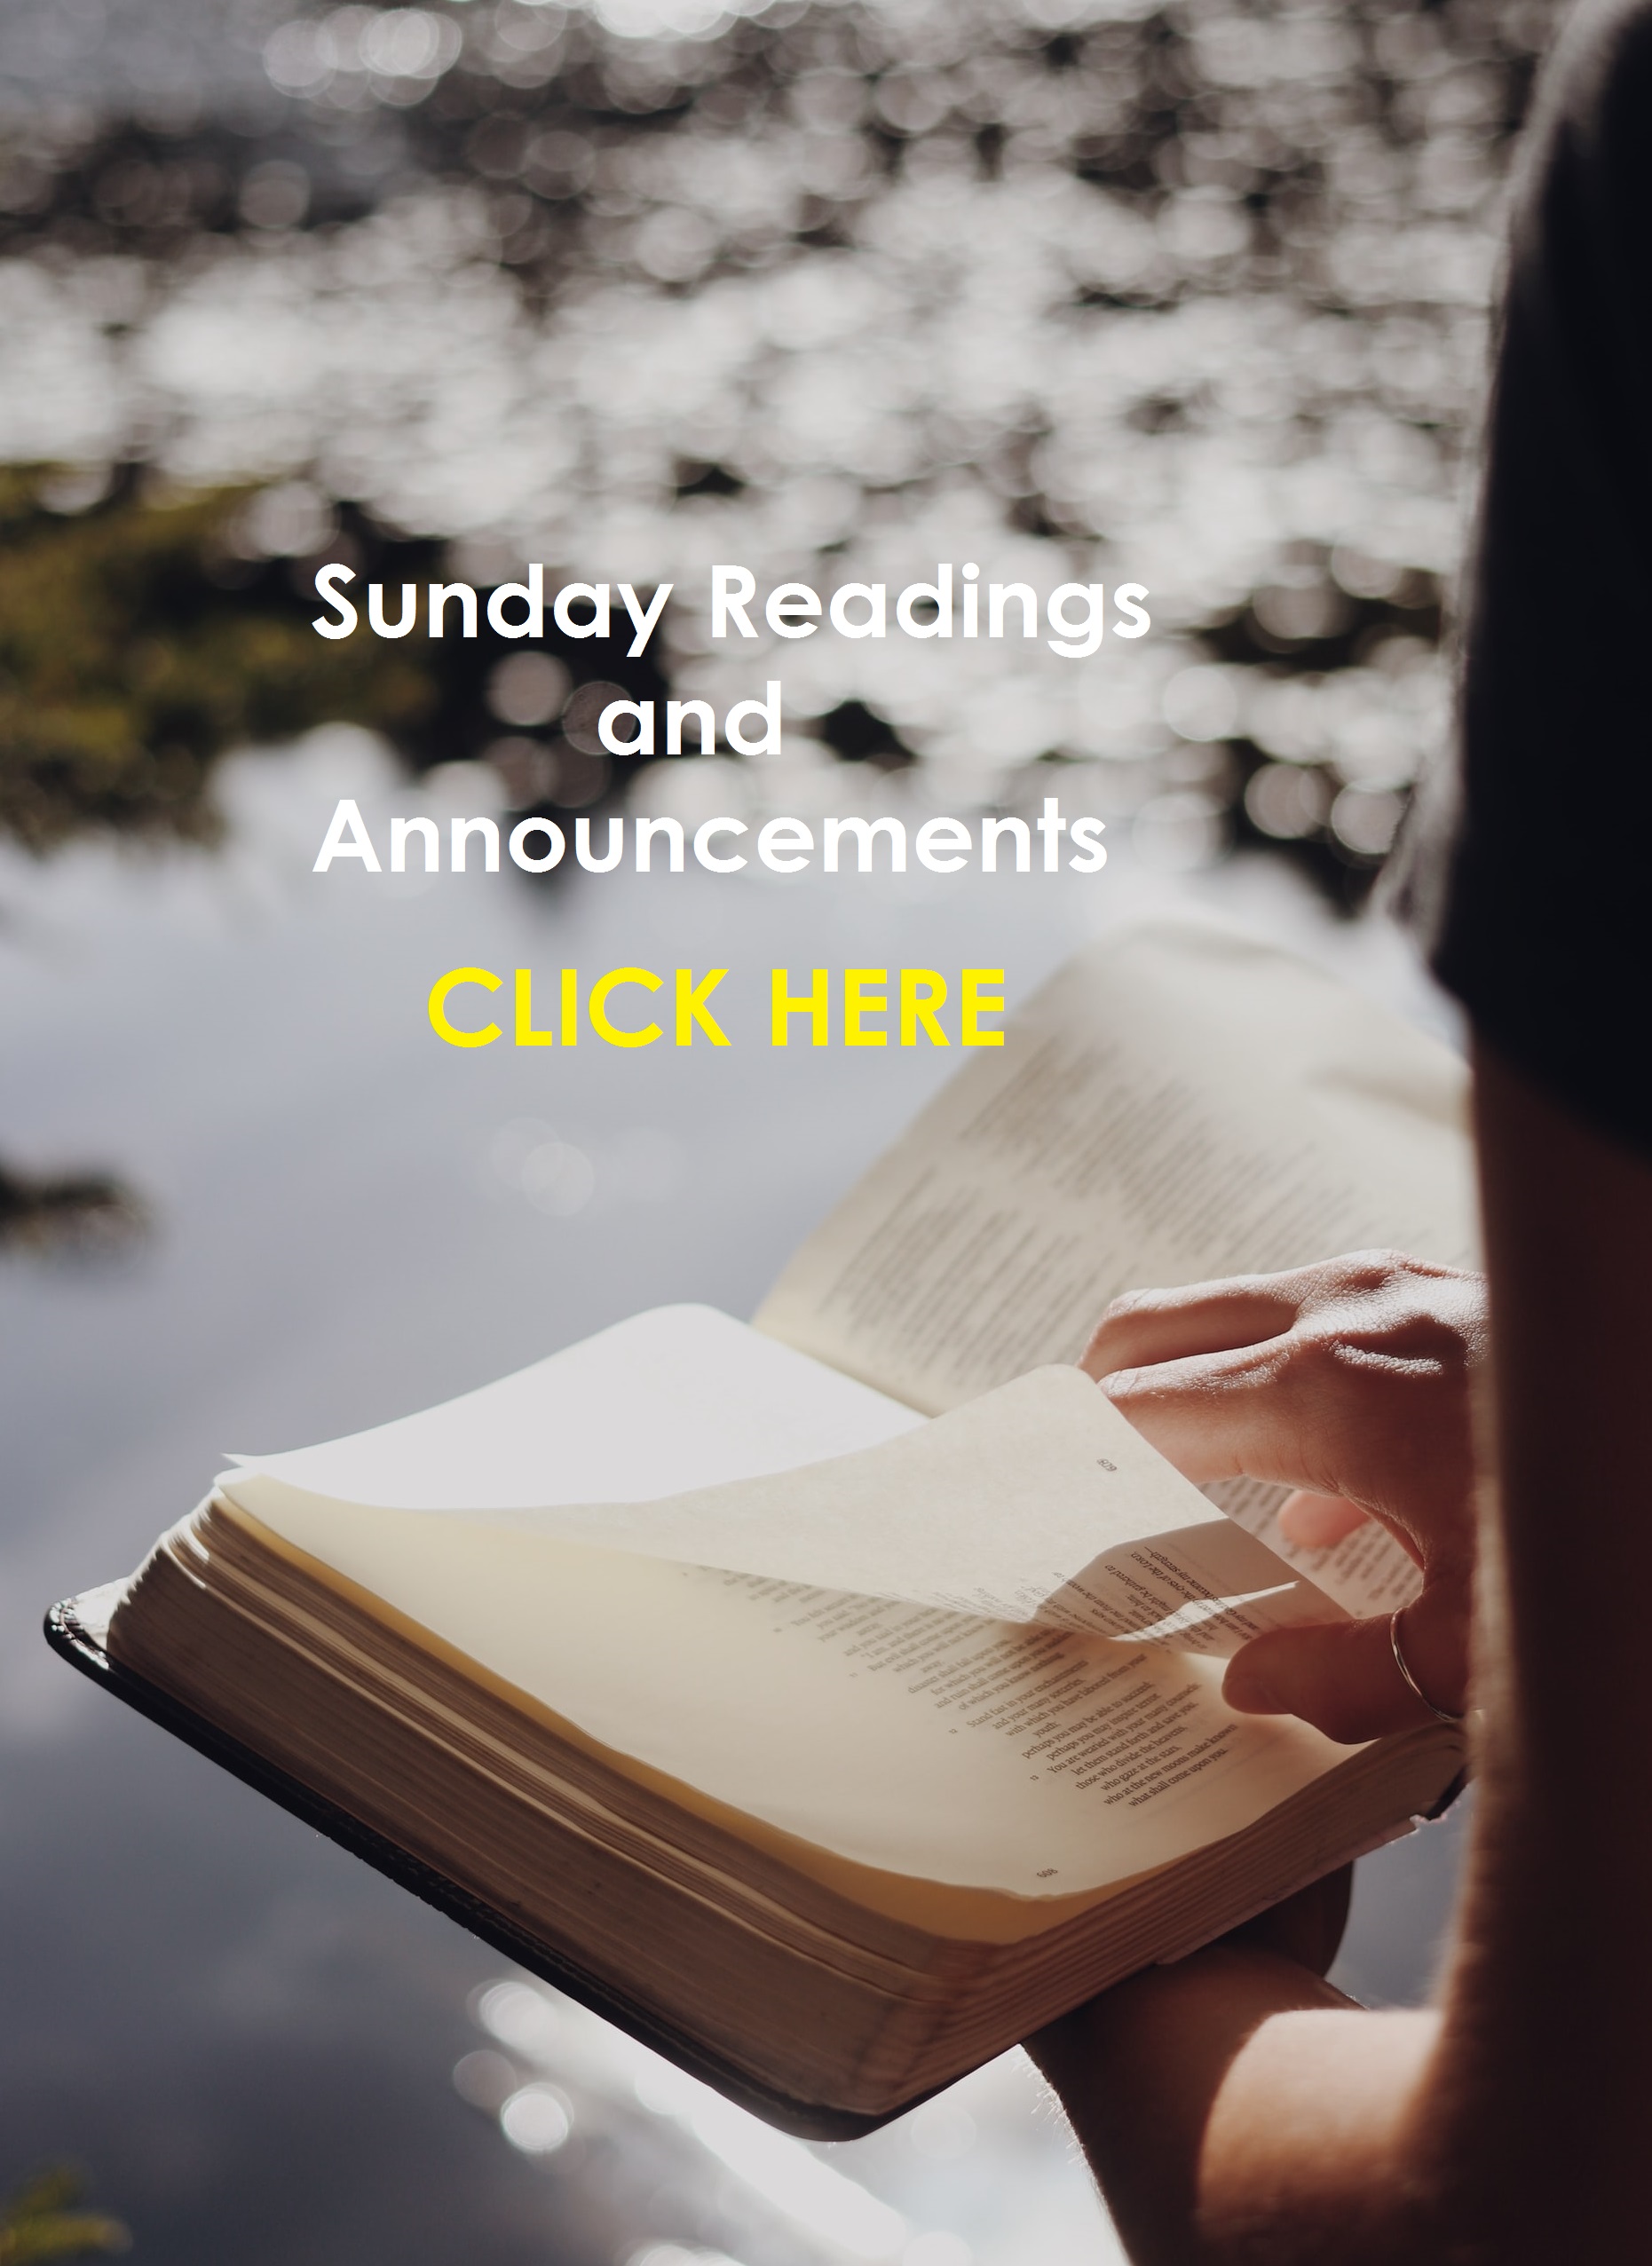 Sunday Readings and Announcements